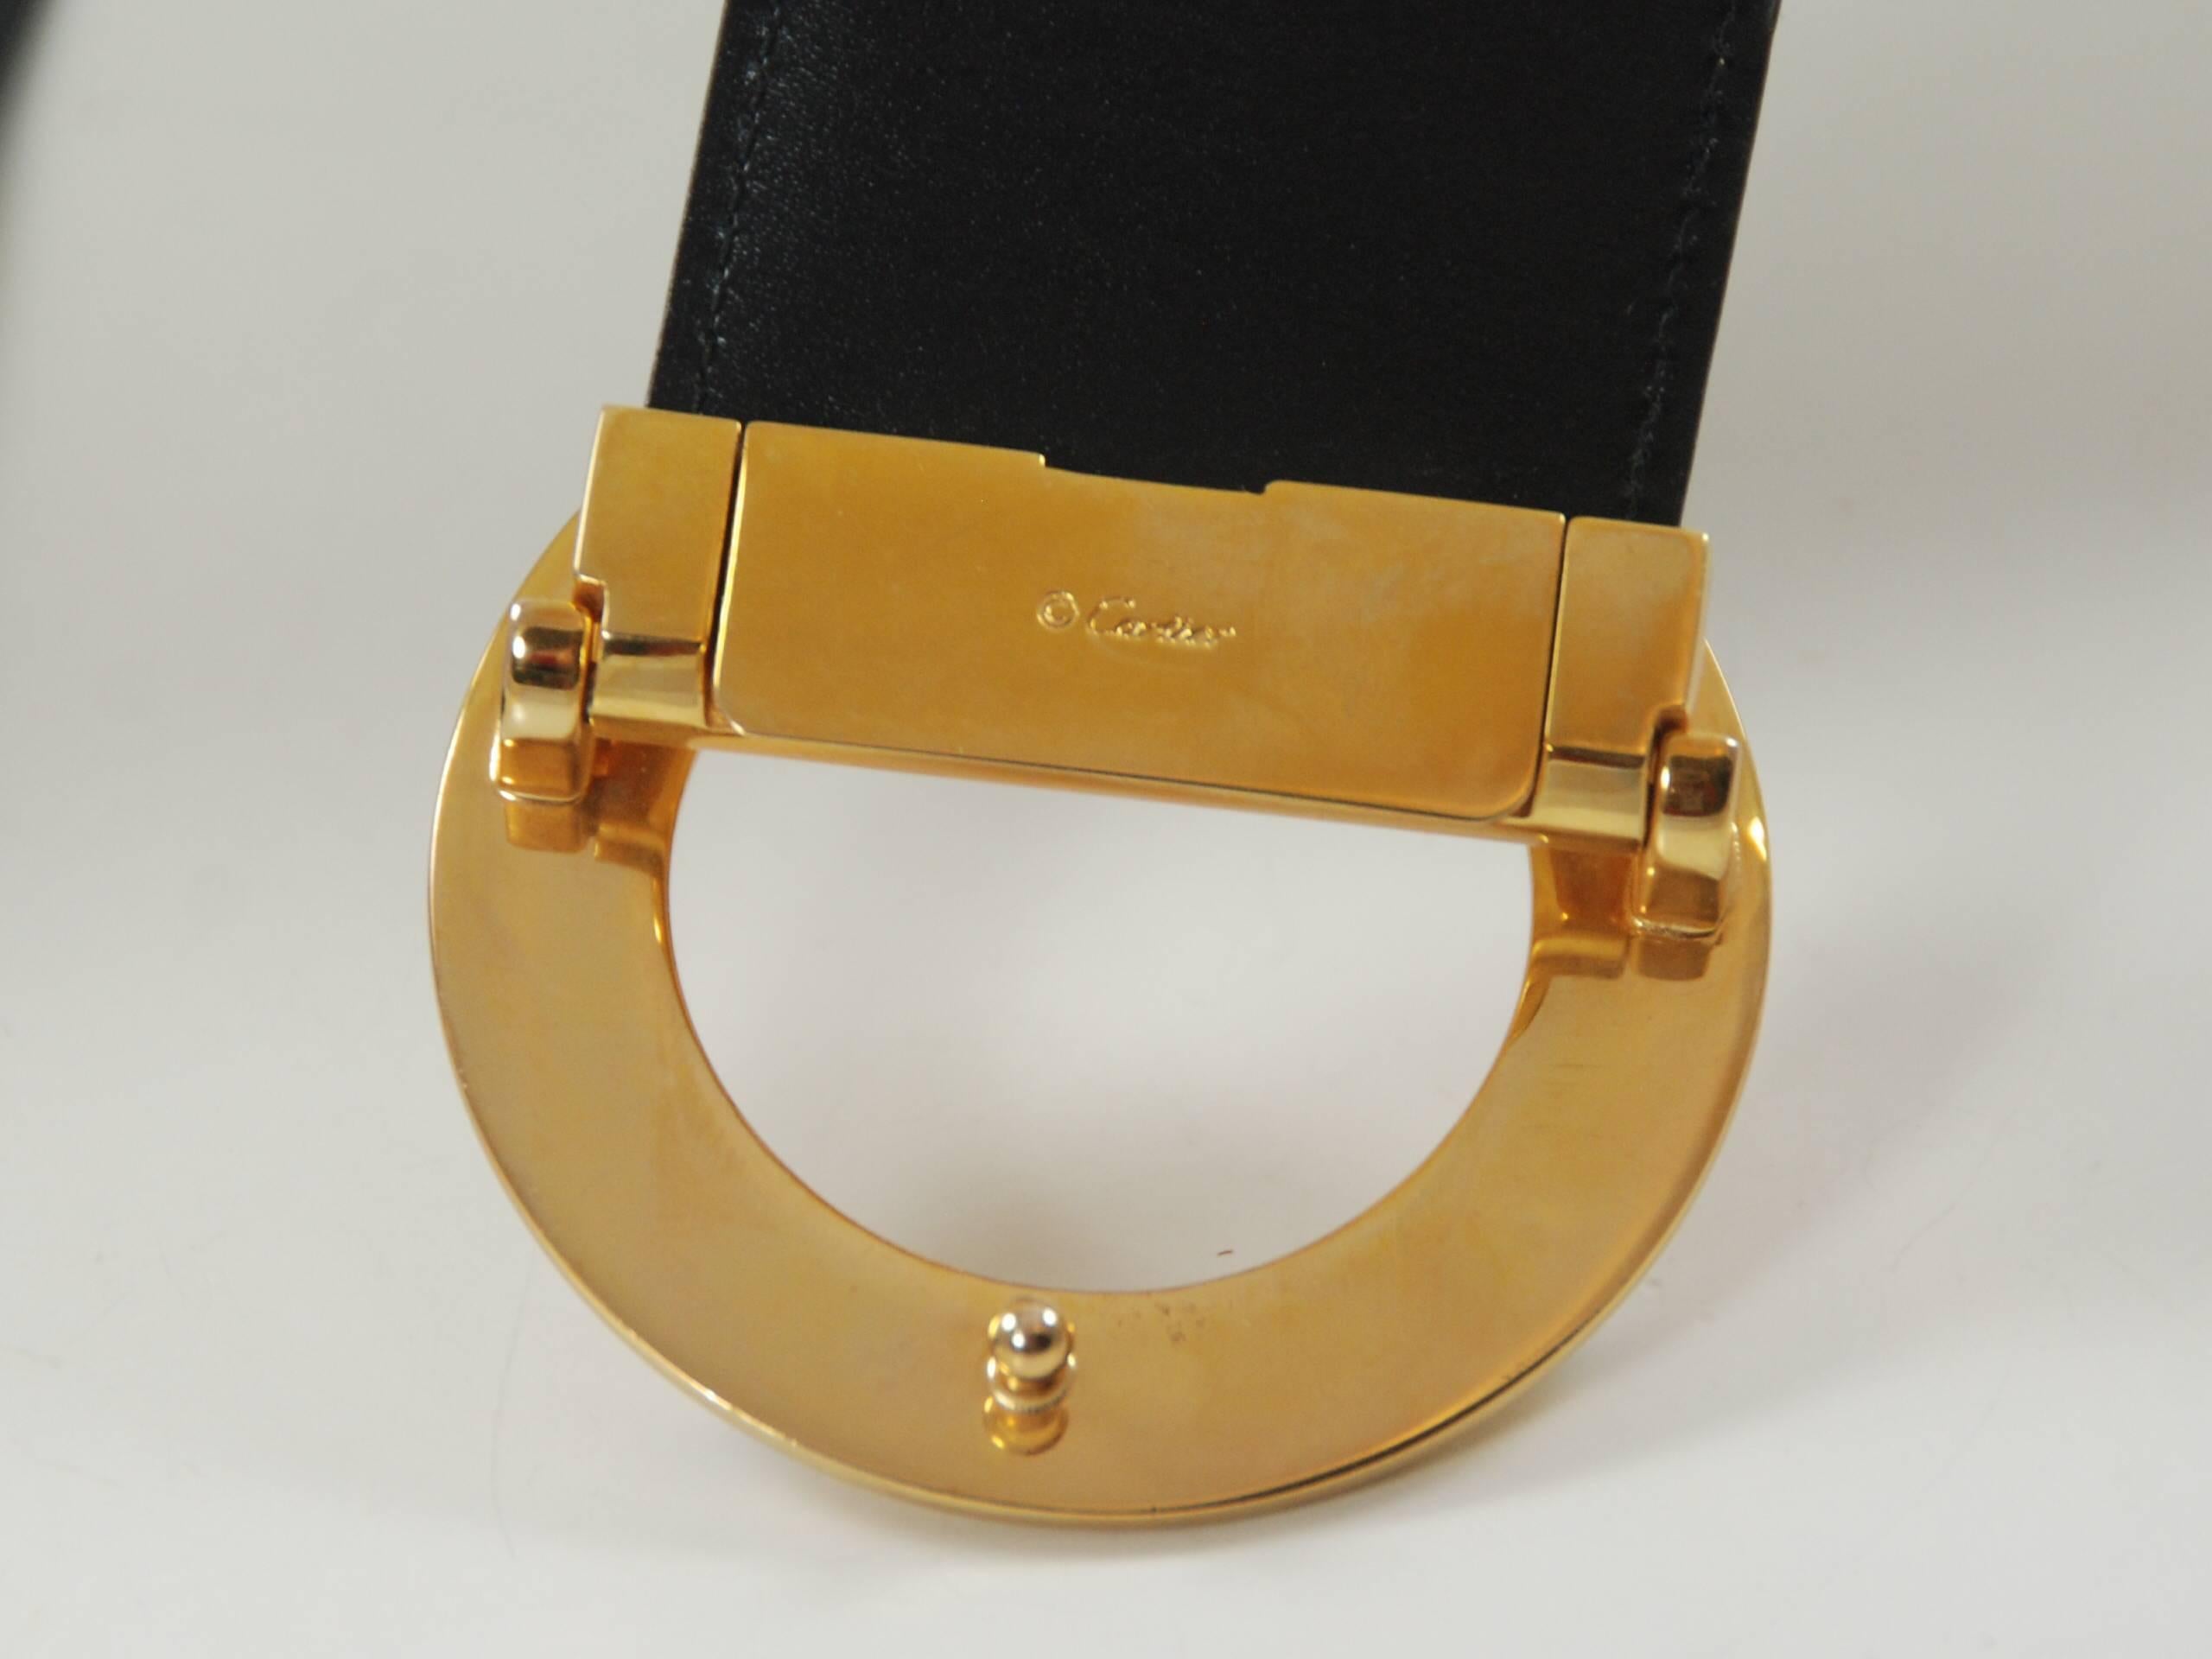 Beautiful black belt by Cartier Paris. Giraffe style buckle. Buckle measures 2 1/2 inches and is signed Cartier. The belt measures a total of 32 1/2